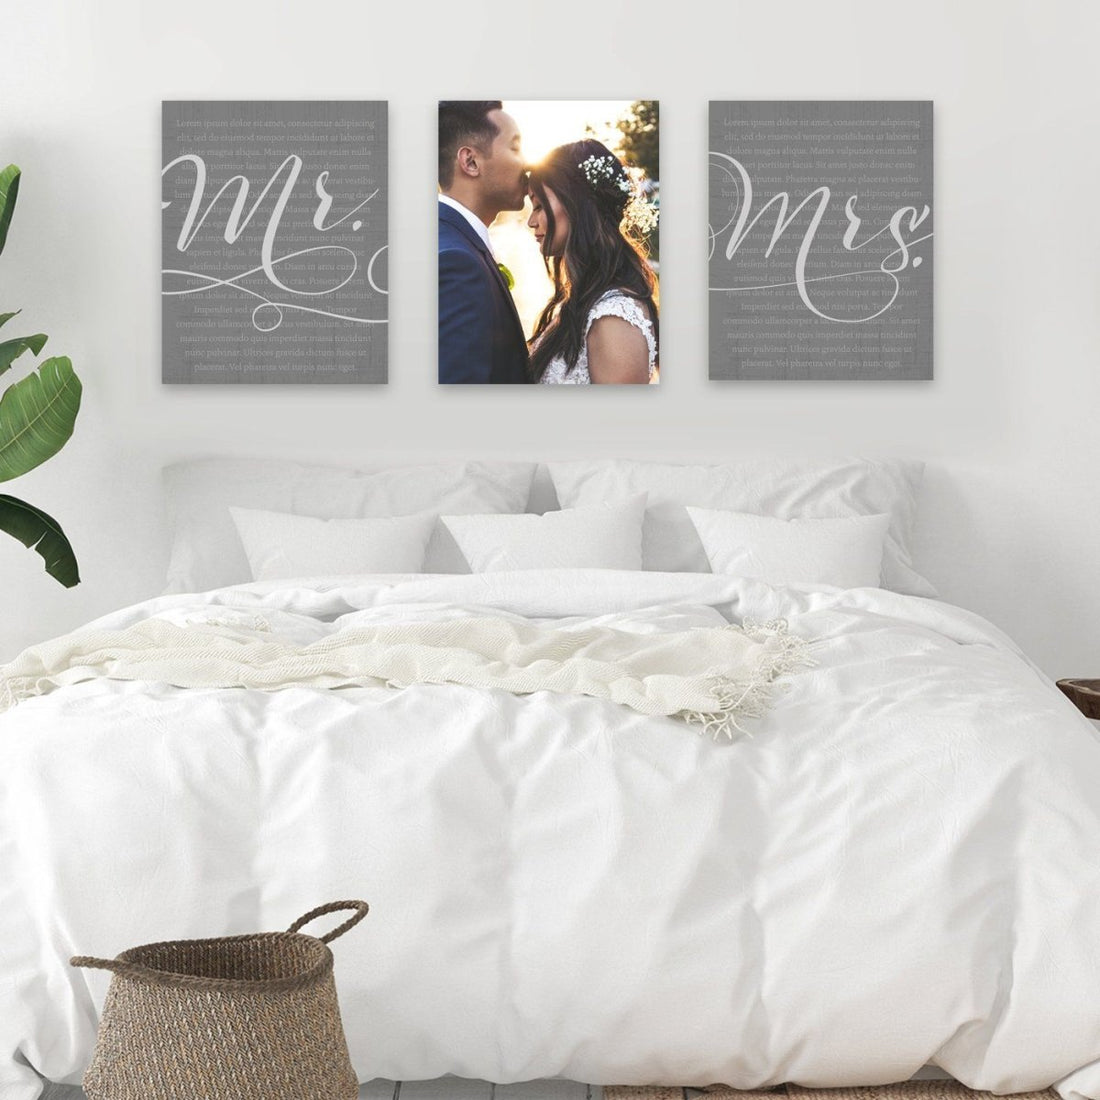 His and Her Custom Wedding Vows Panel Signs - Pretty Perfect Studio